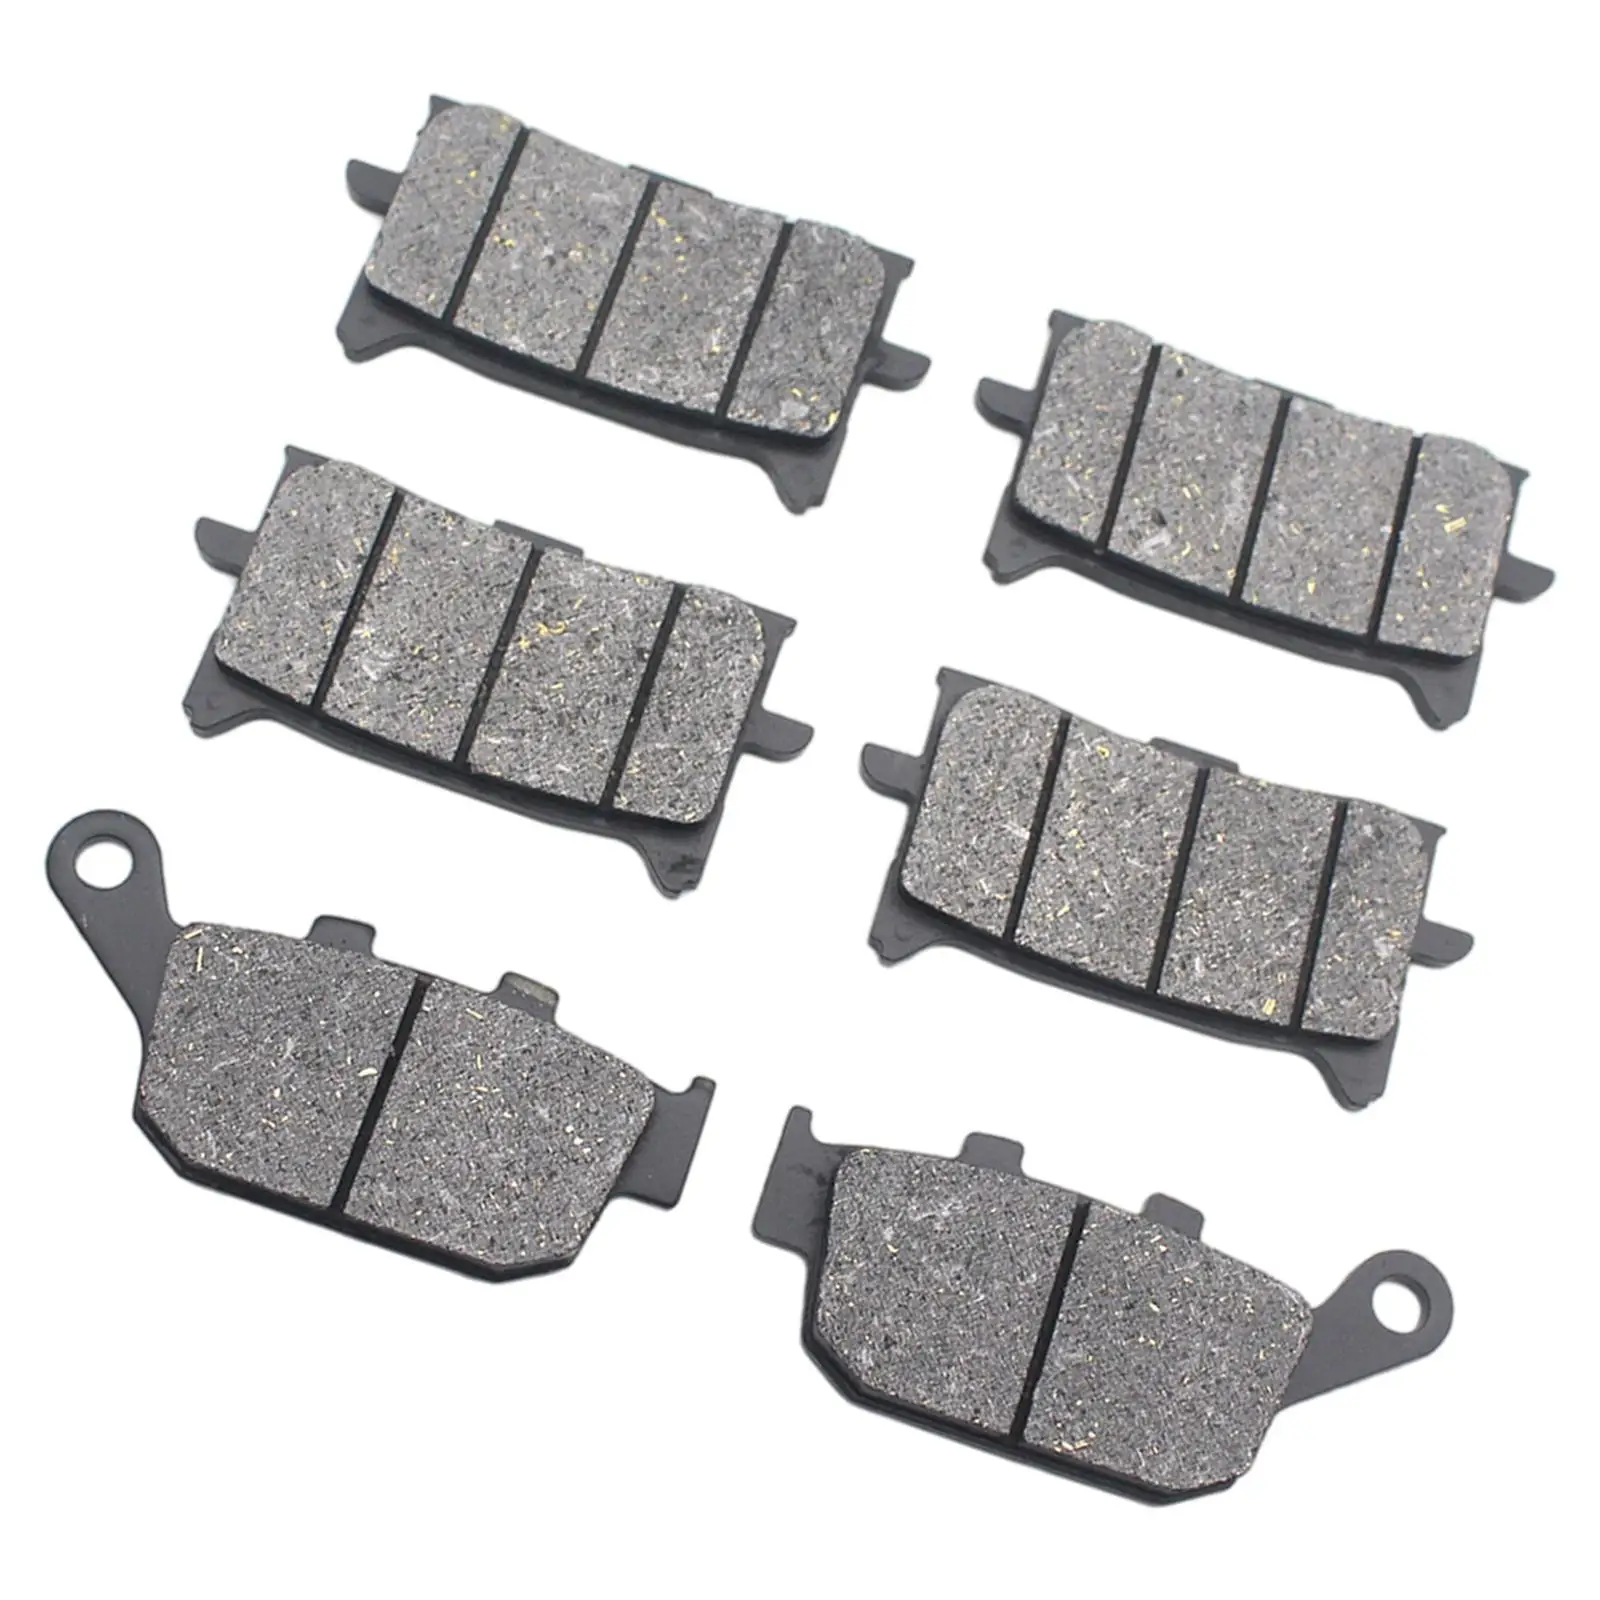 Motorcycle Brake Pads Automotive Brake System Front Rear Fit for